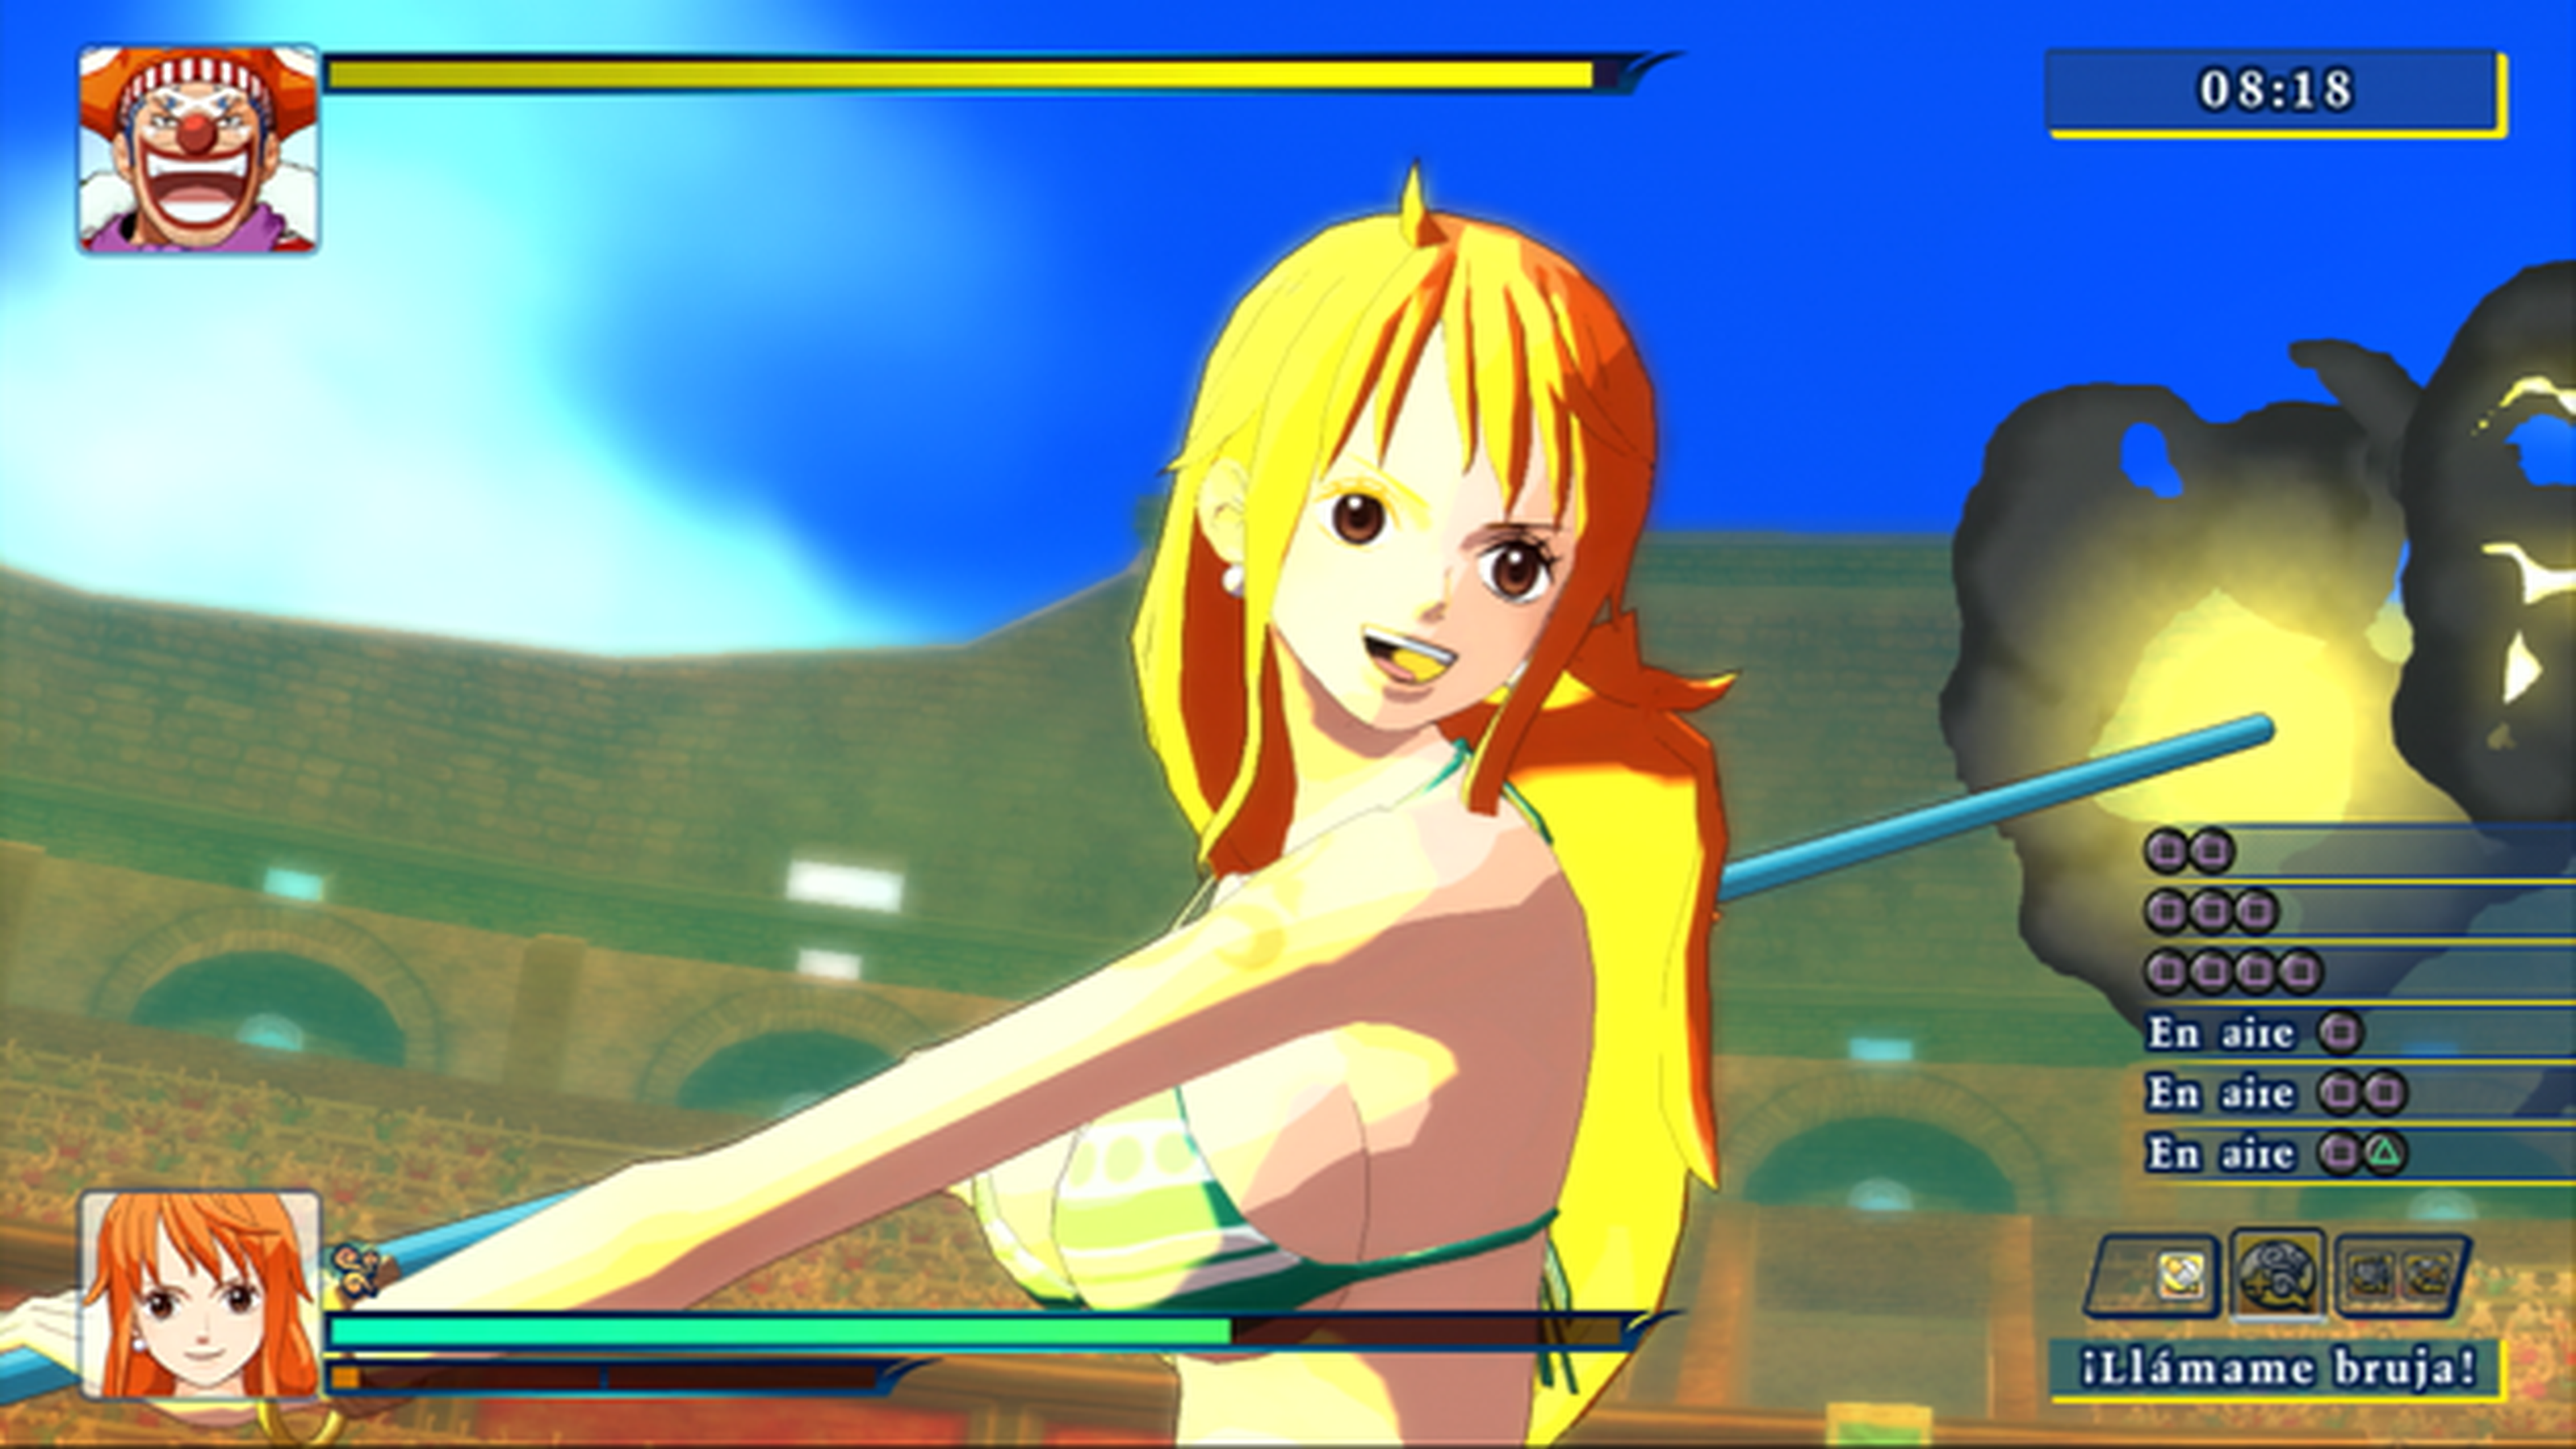 Análisis de One Piece: Unlimited World Red